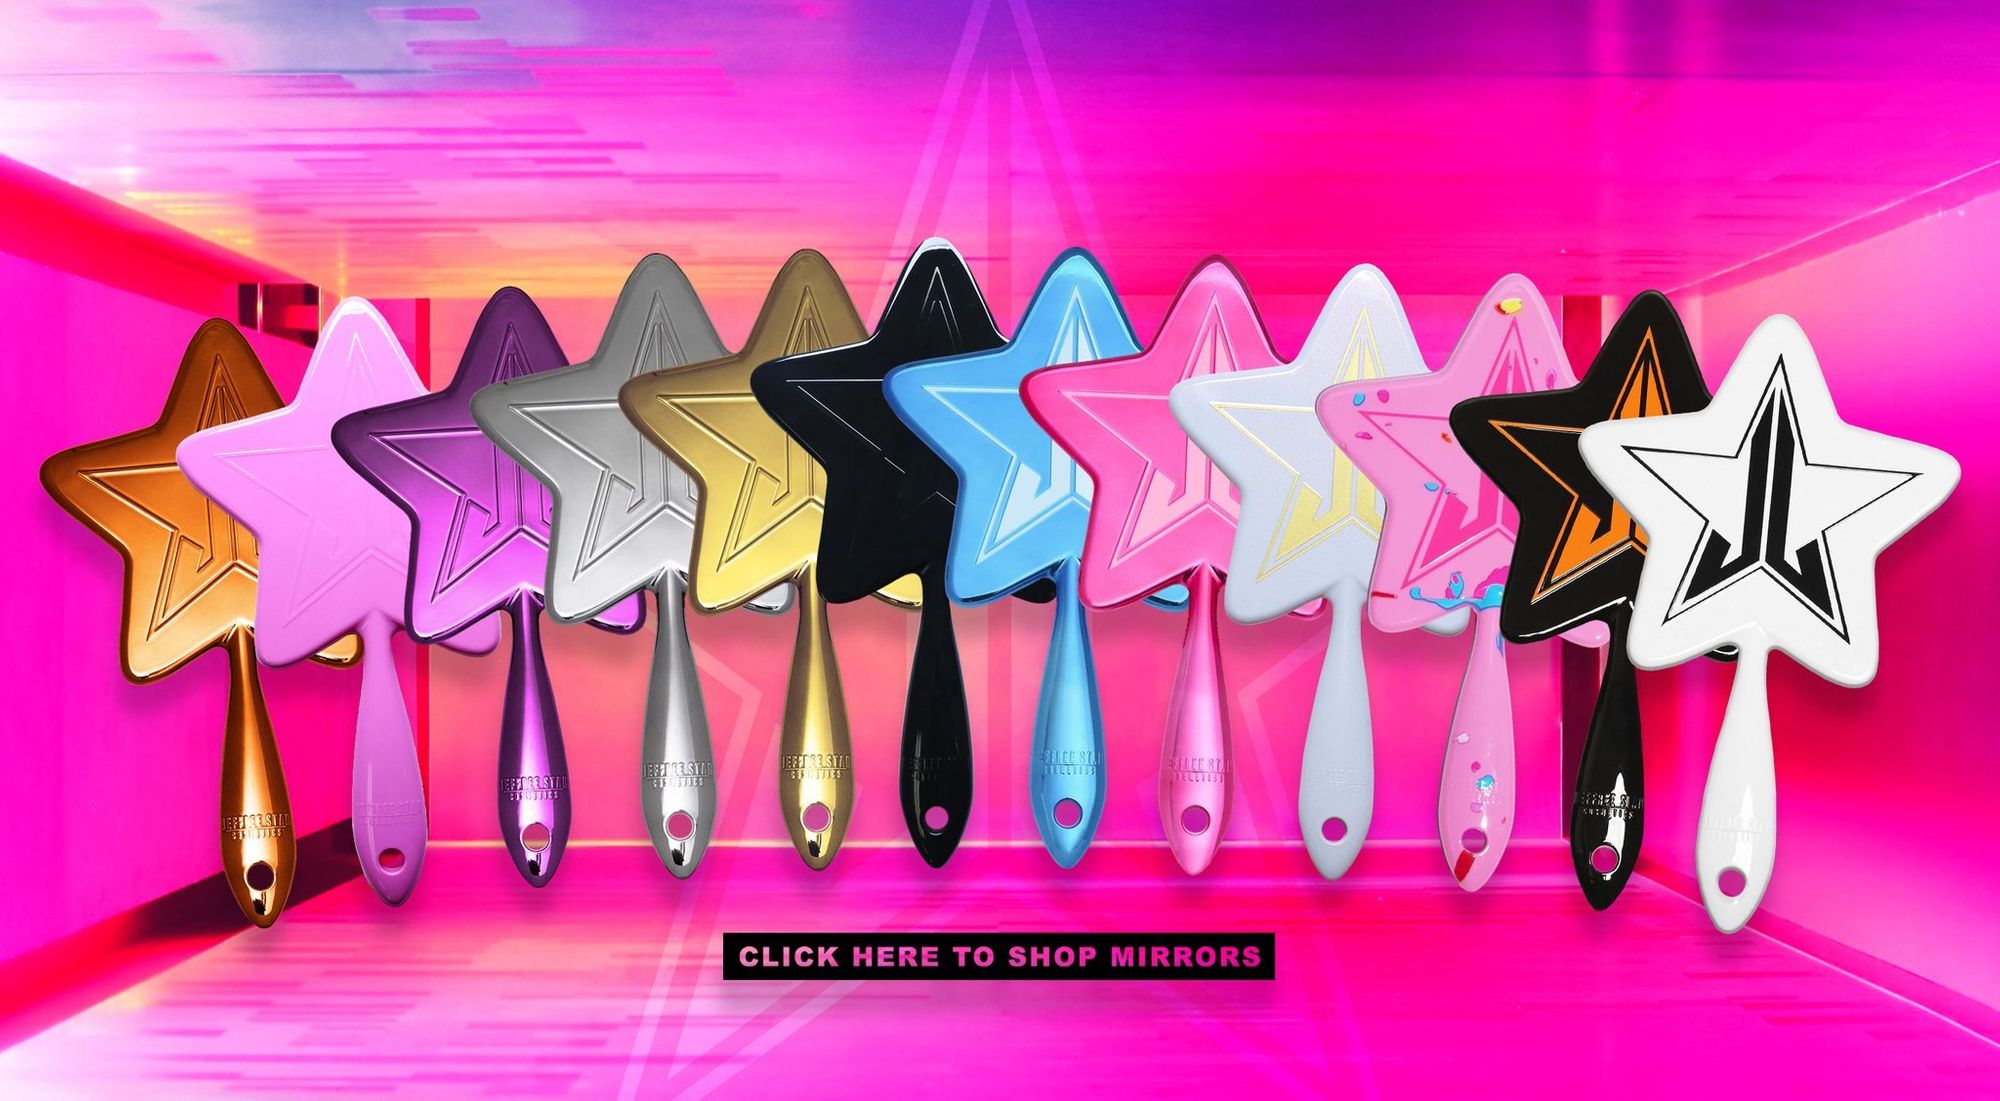 Star hand mirror is the best-seller of Jeffree Star Cosmetics.